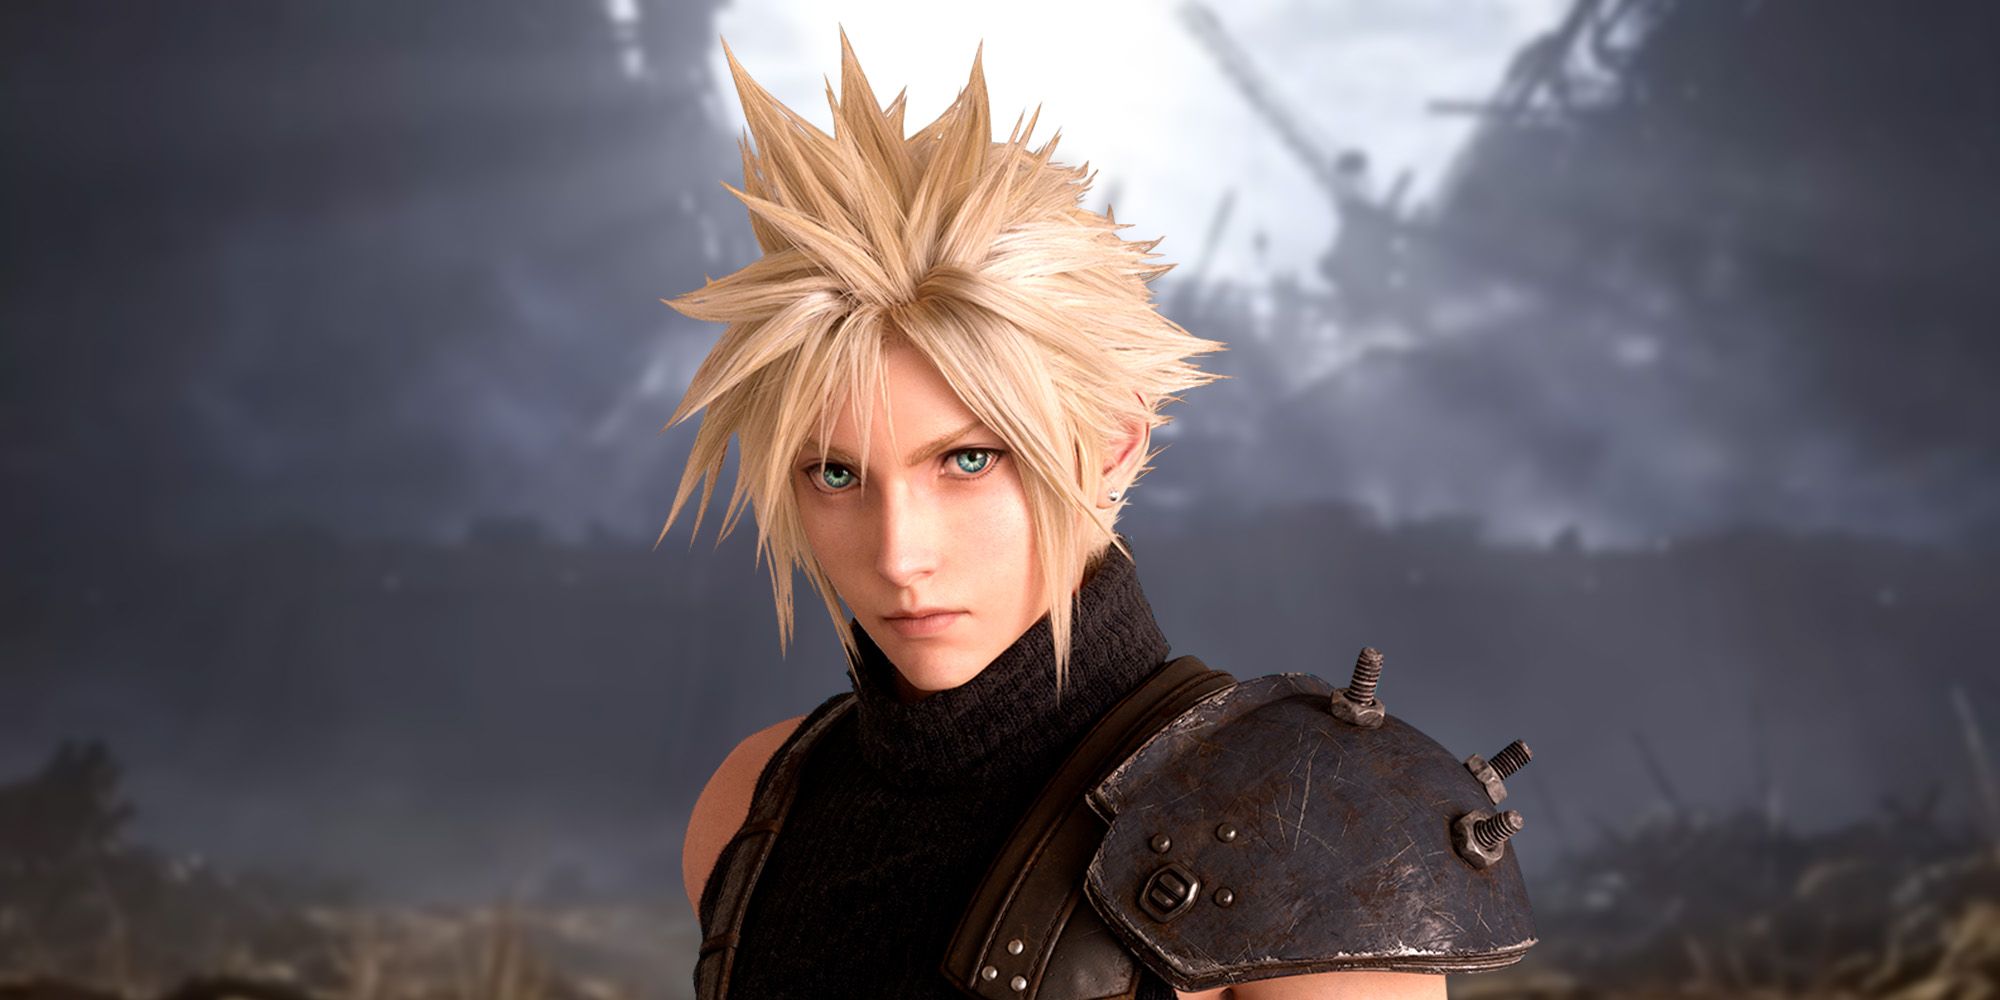 Final Fantasy 7 protagonist Cloud in front of a blurred background of ruins from FF7 Rebirth.